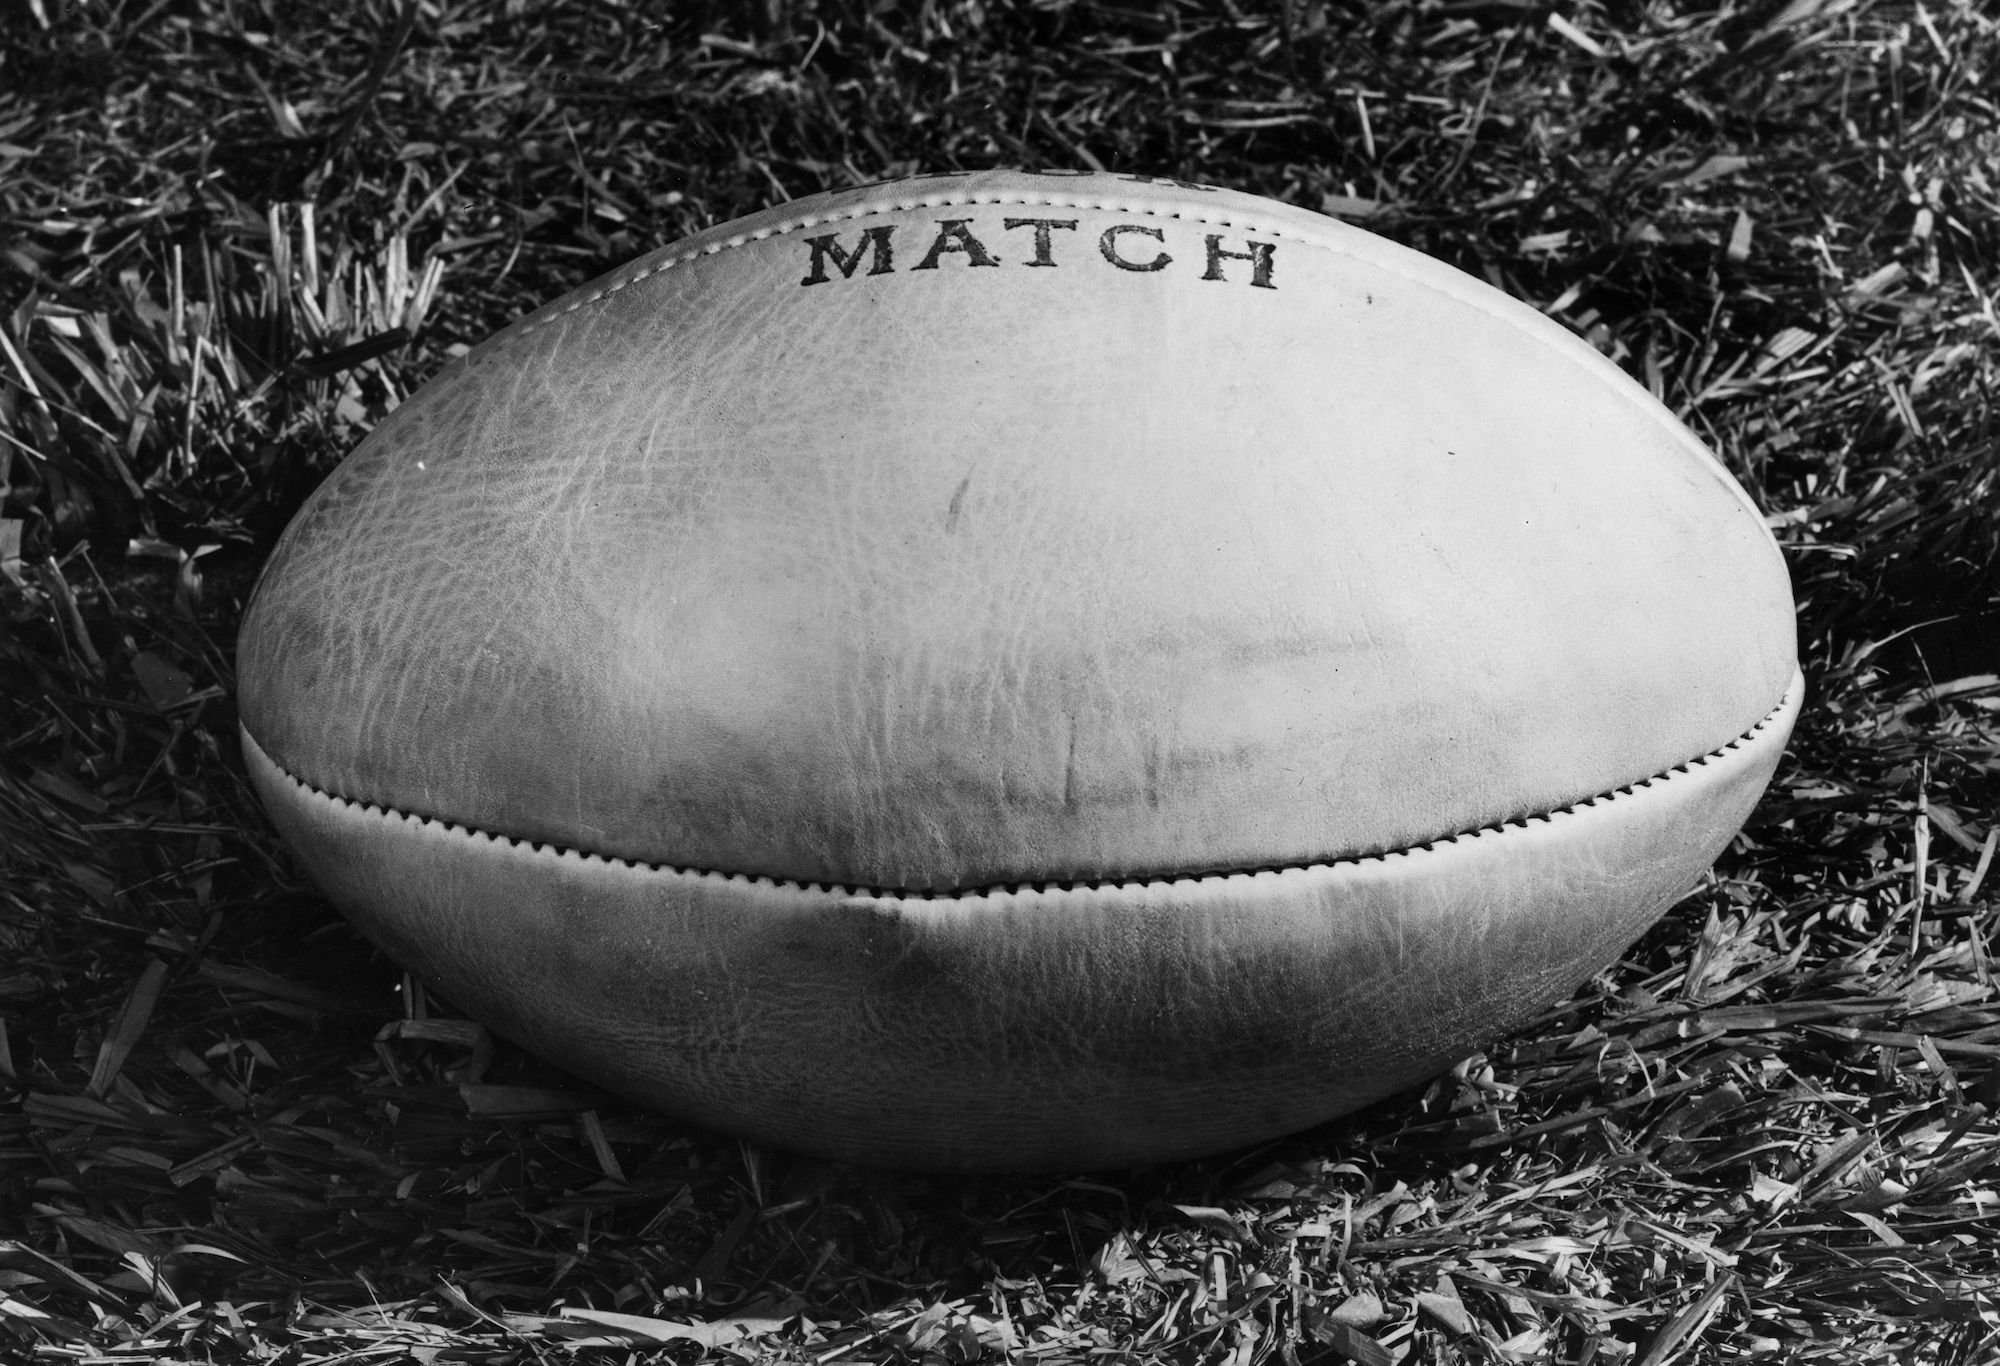 Generic vintage rugby league or rugby union ball